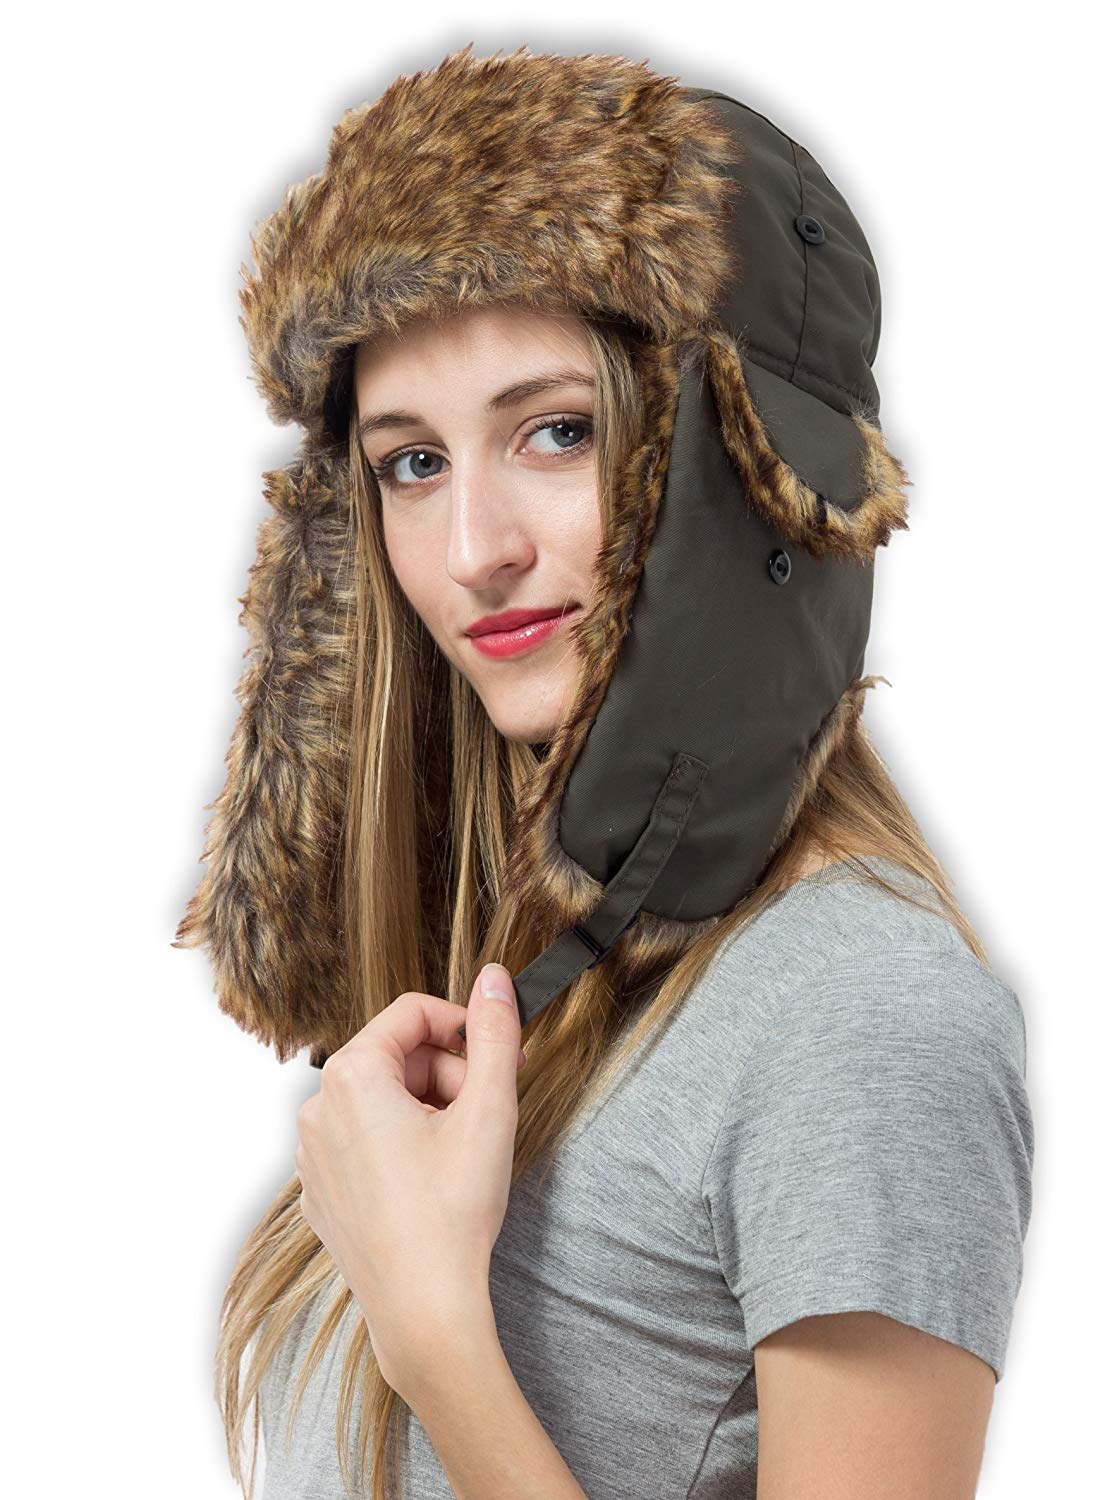 Winter Trapper Hat - Russian Ushanka Trooper Aviator Hats for Men & Women -  Snow Eskimo Hat with Ear Flaps for Cold Weather Without Mask